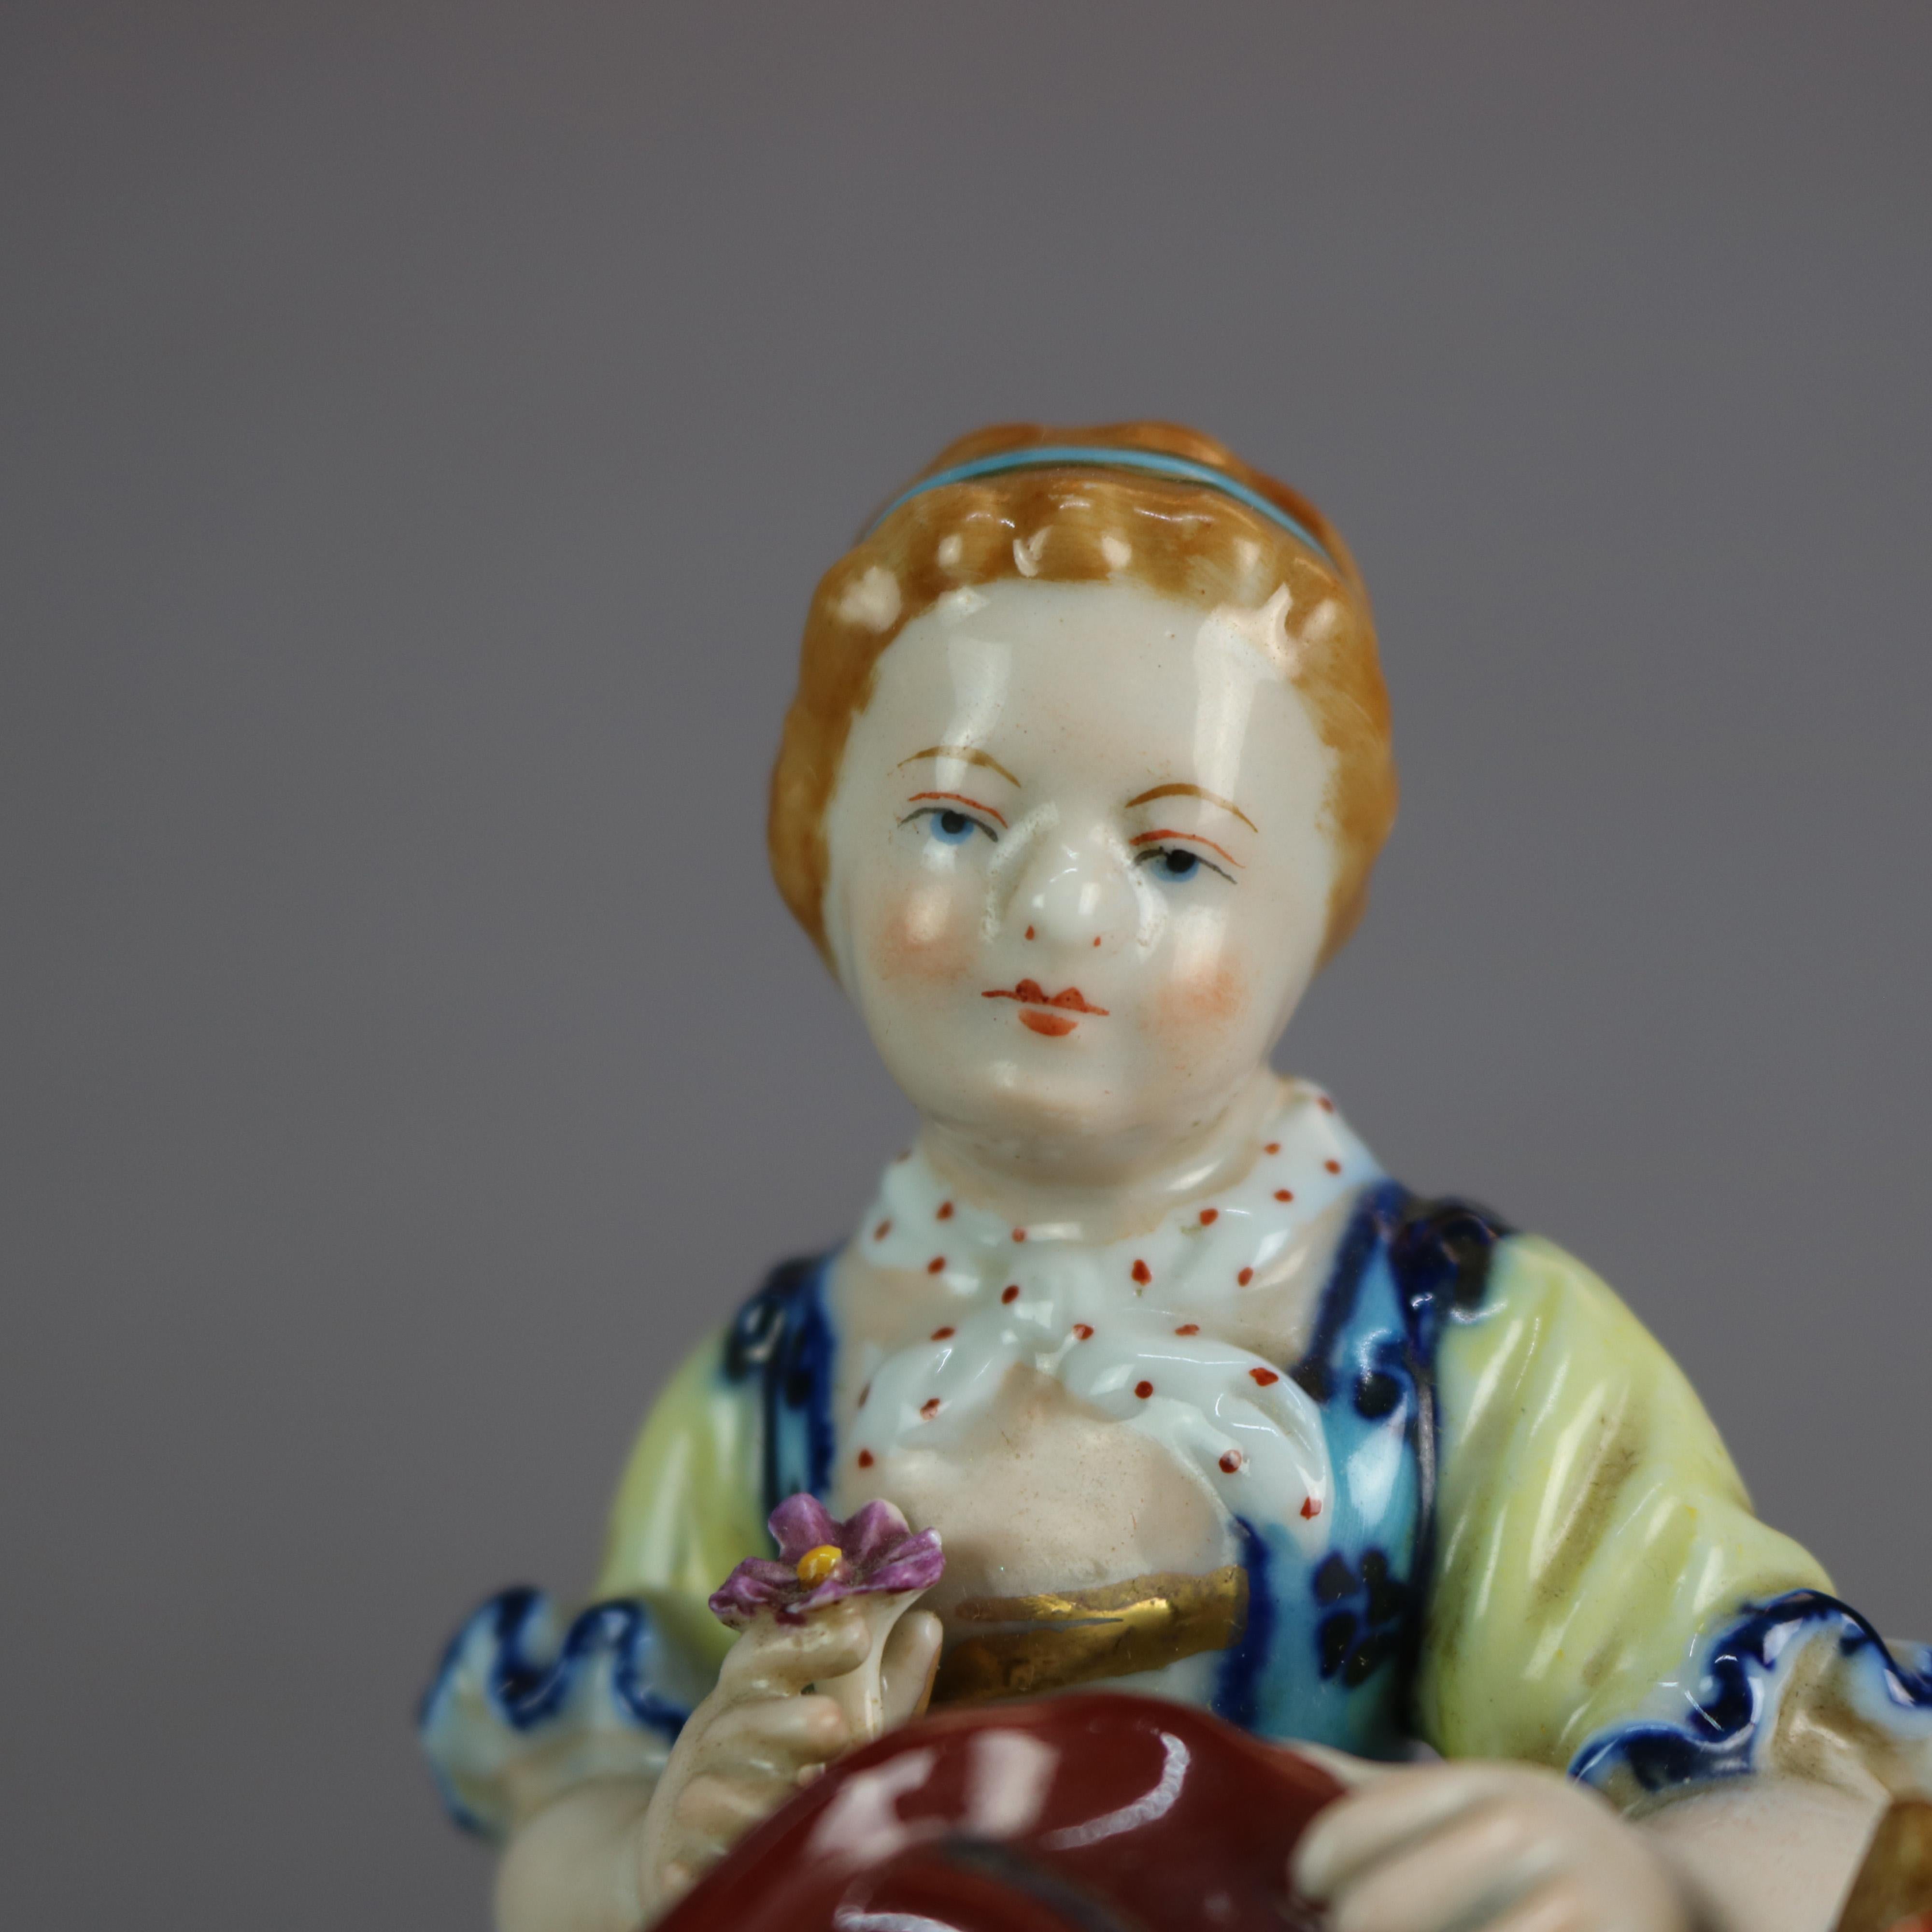 Antique French Sevres porcelain figural grouping depicts hand painted scene with seated girl with her hat and flower in countryside setting, raised on plinth with foliate and gilt decorated border, marked on base as photographed, c1880

Measures: